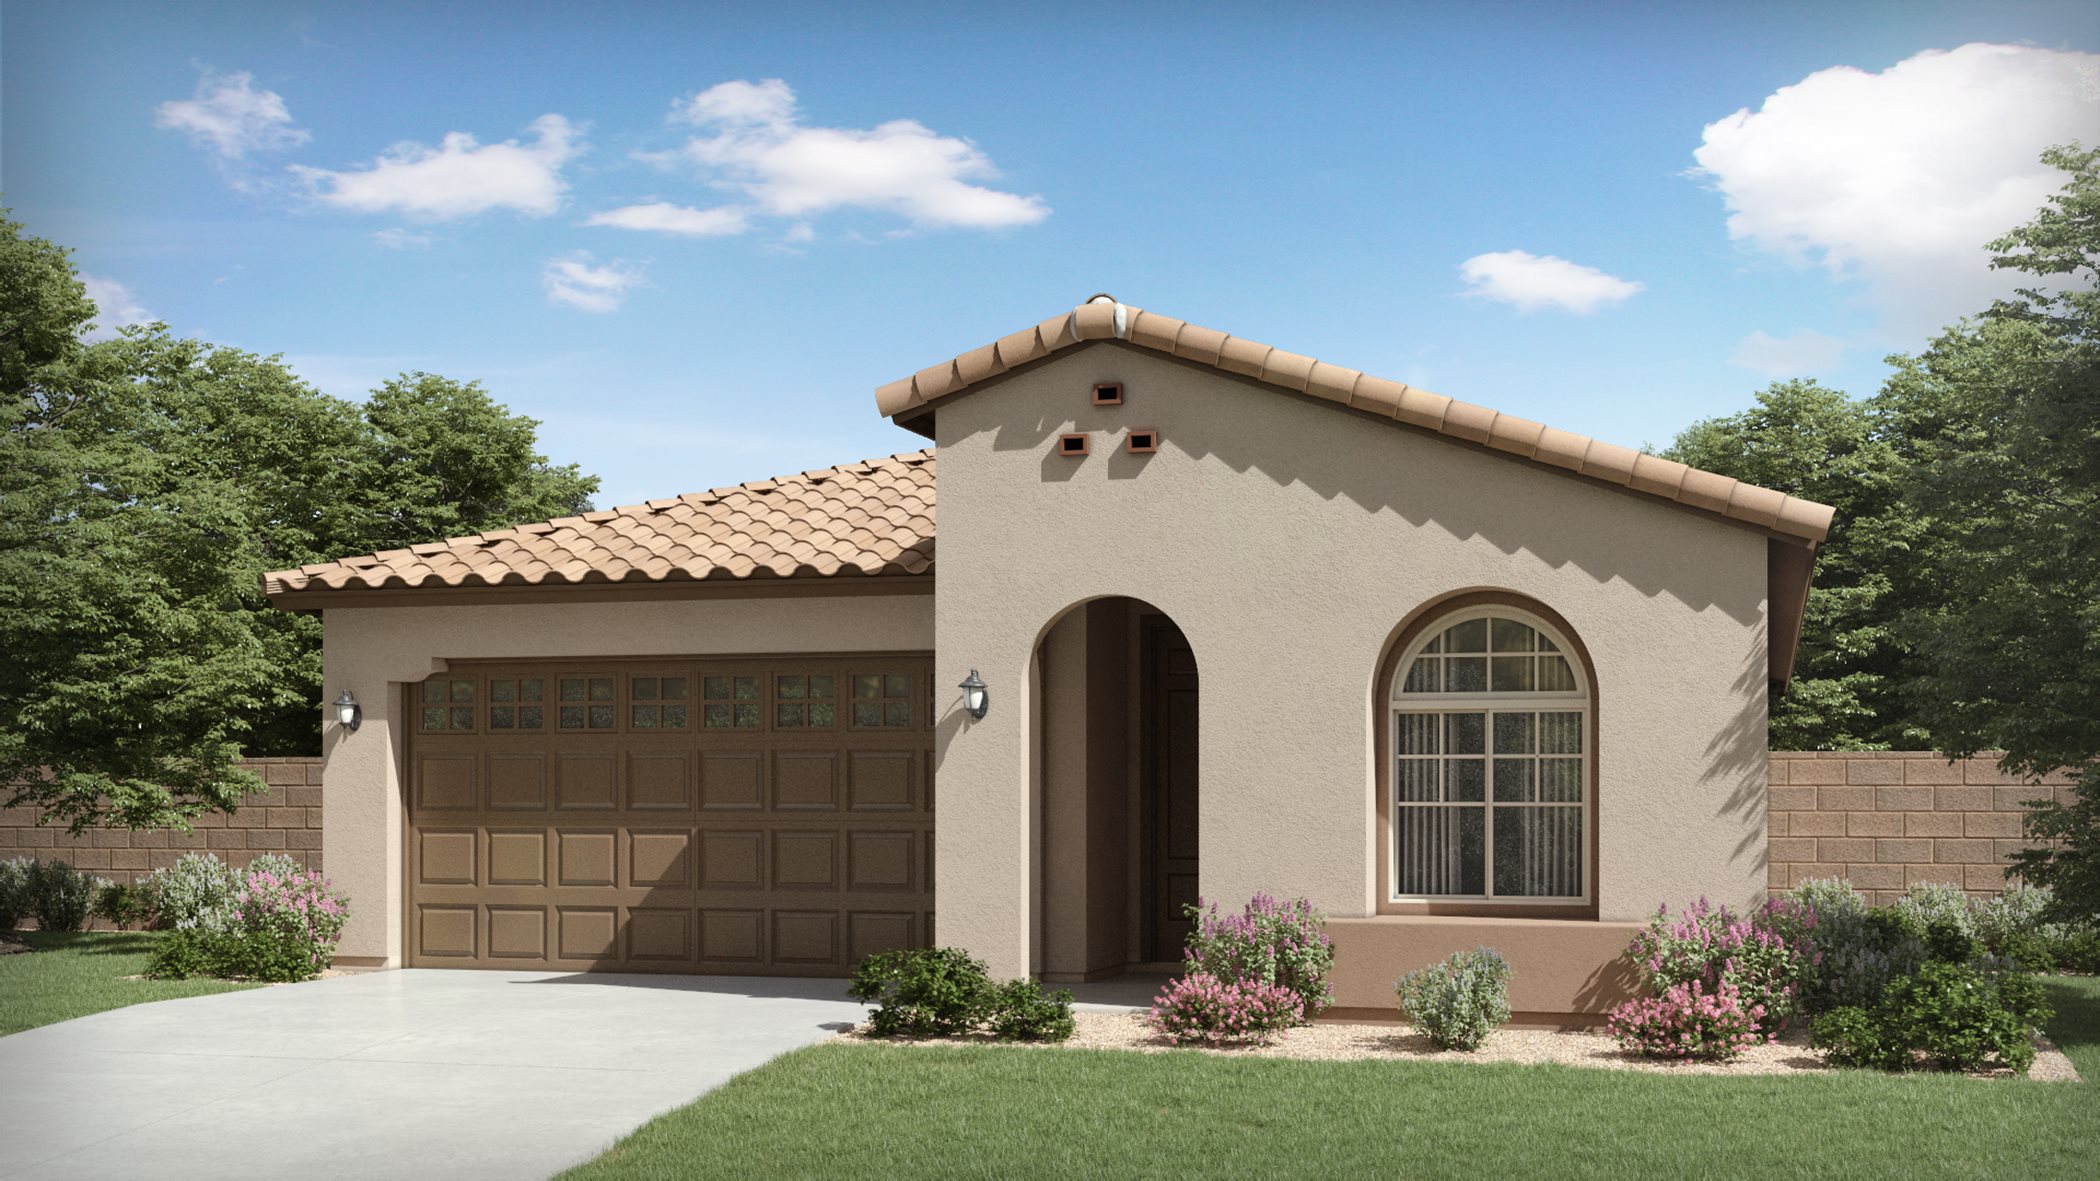 Ironwood Plan 3518 A Spanish Colonial